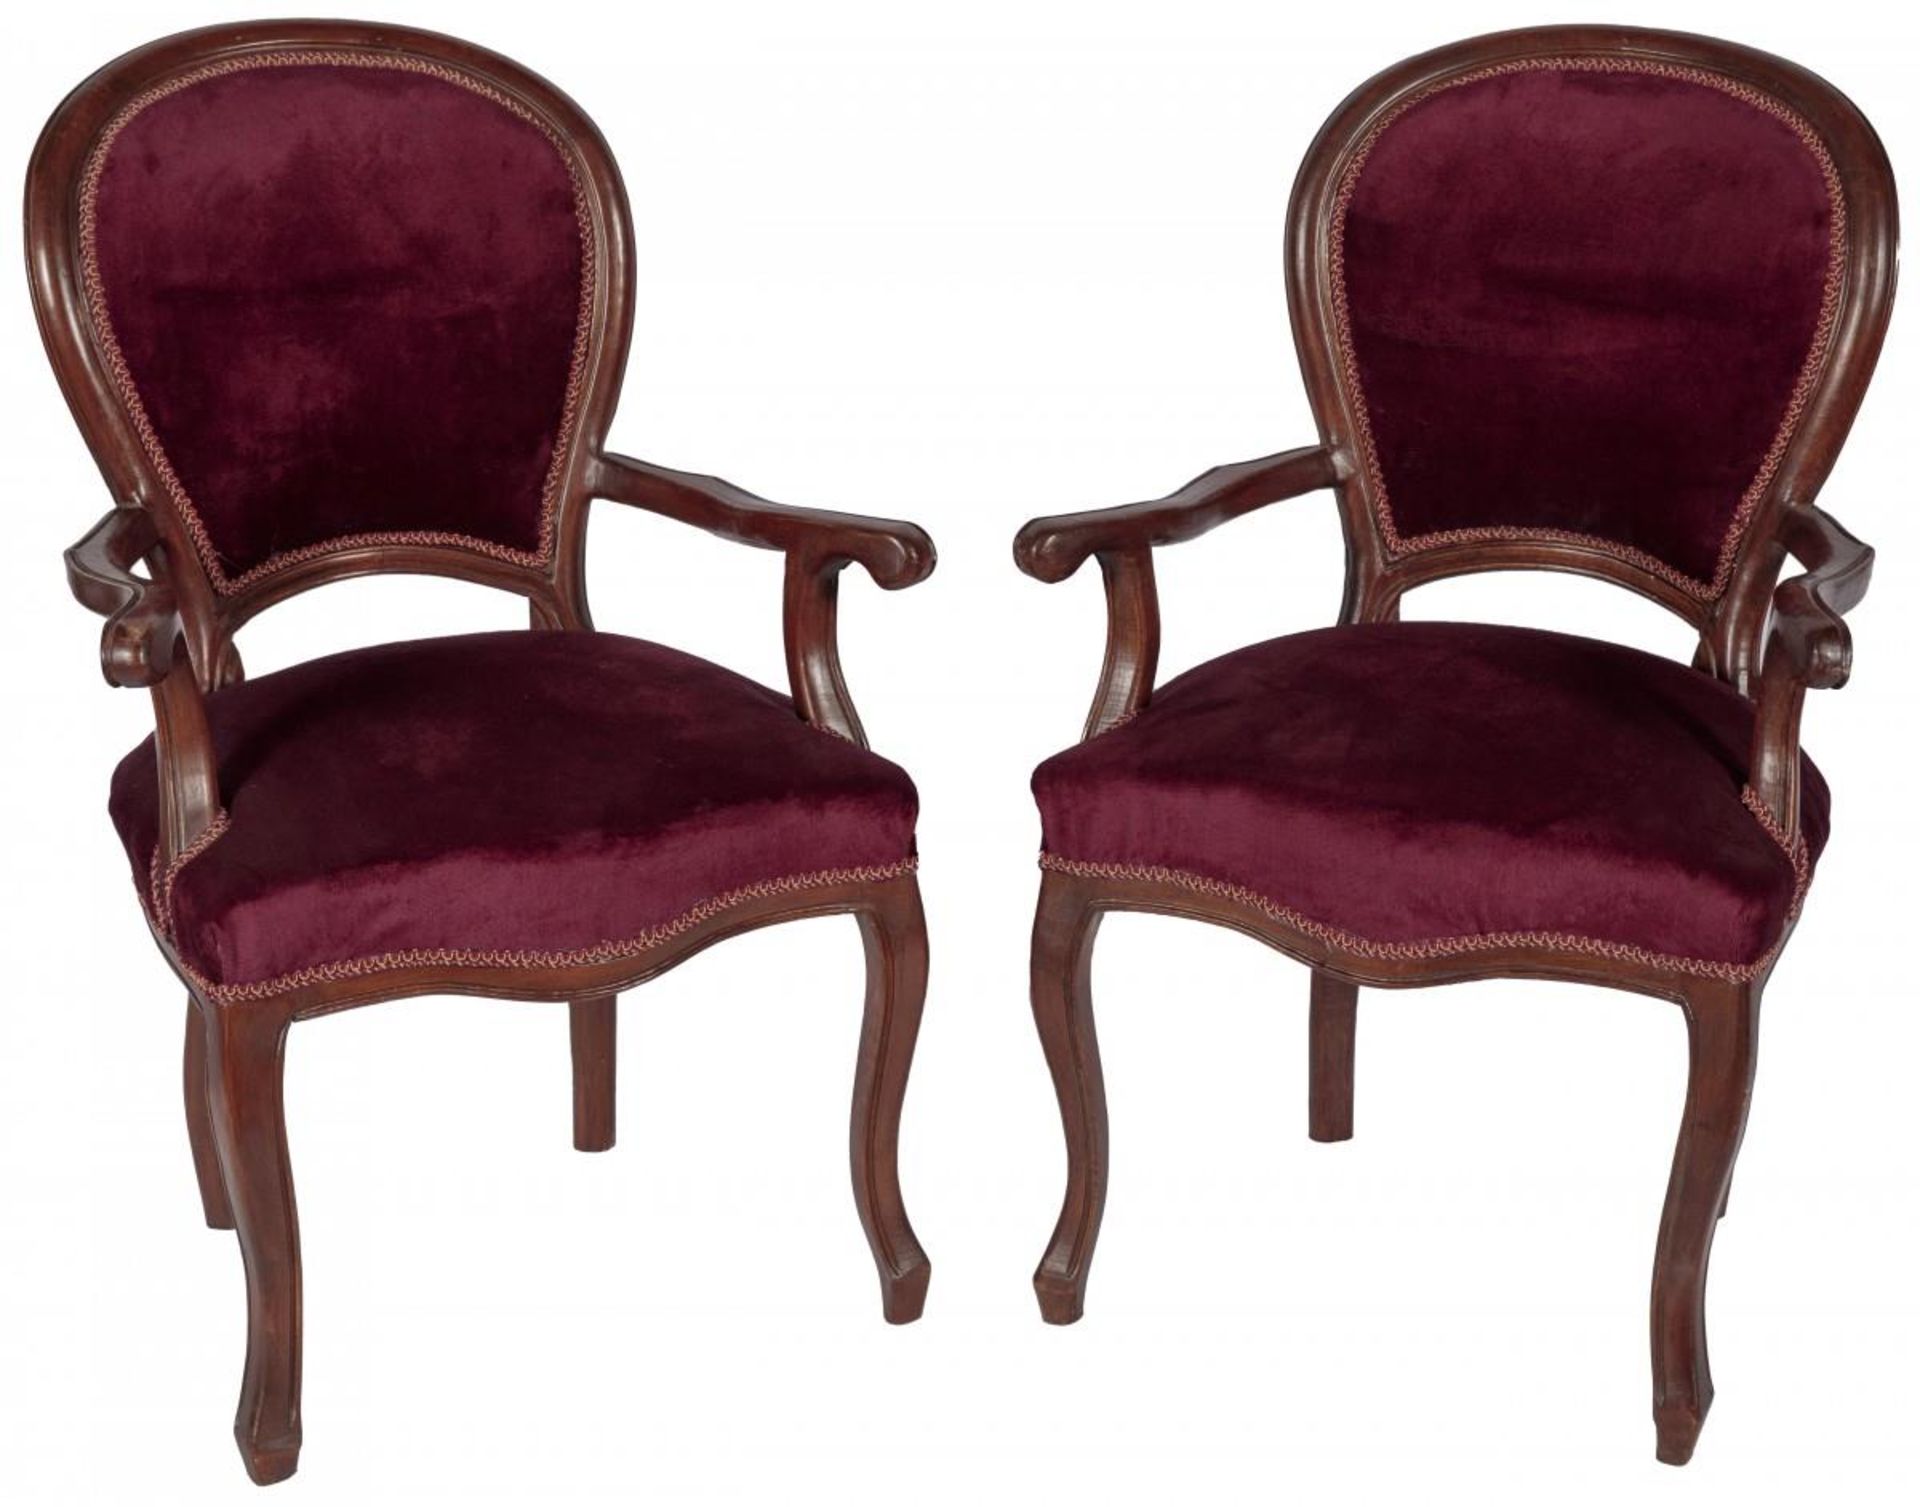 A set of (2) Voltaire-chairs, 19th century.